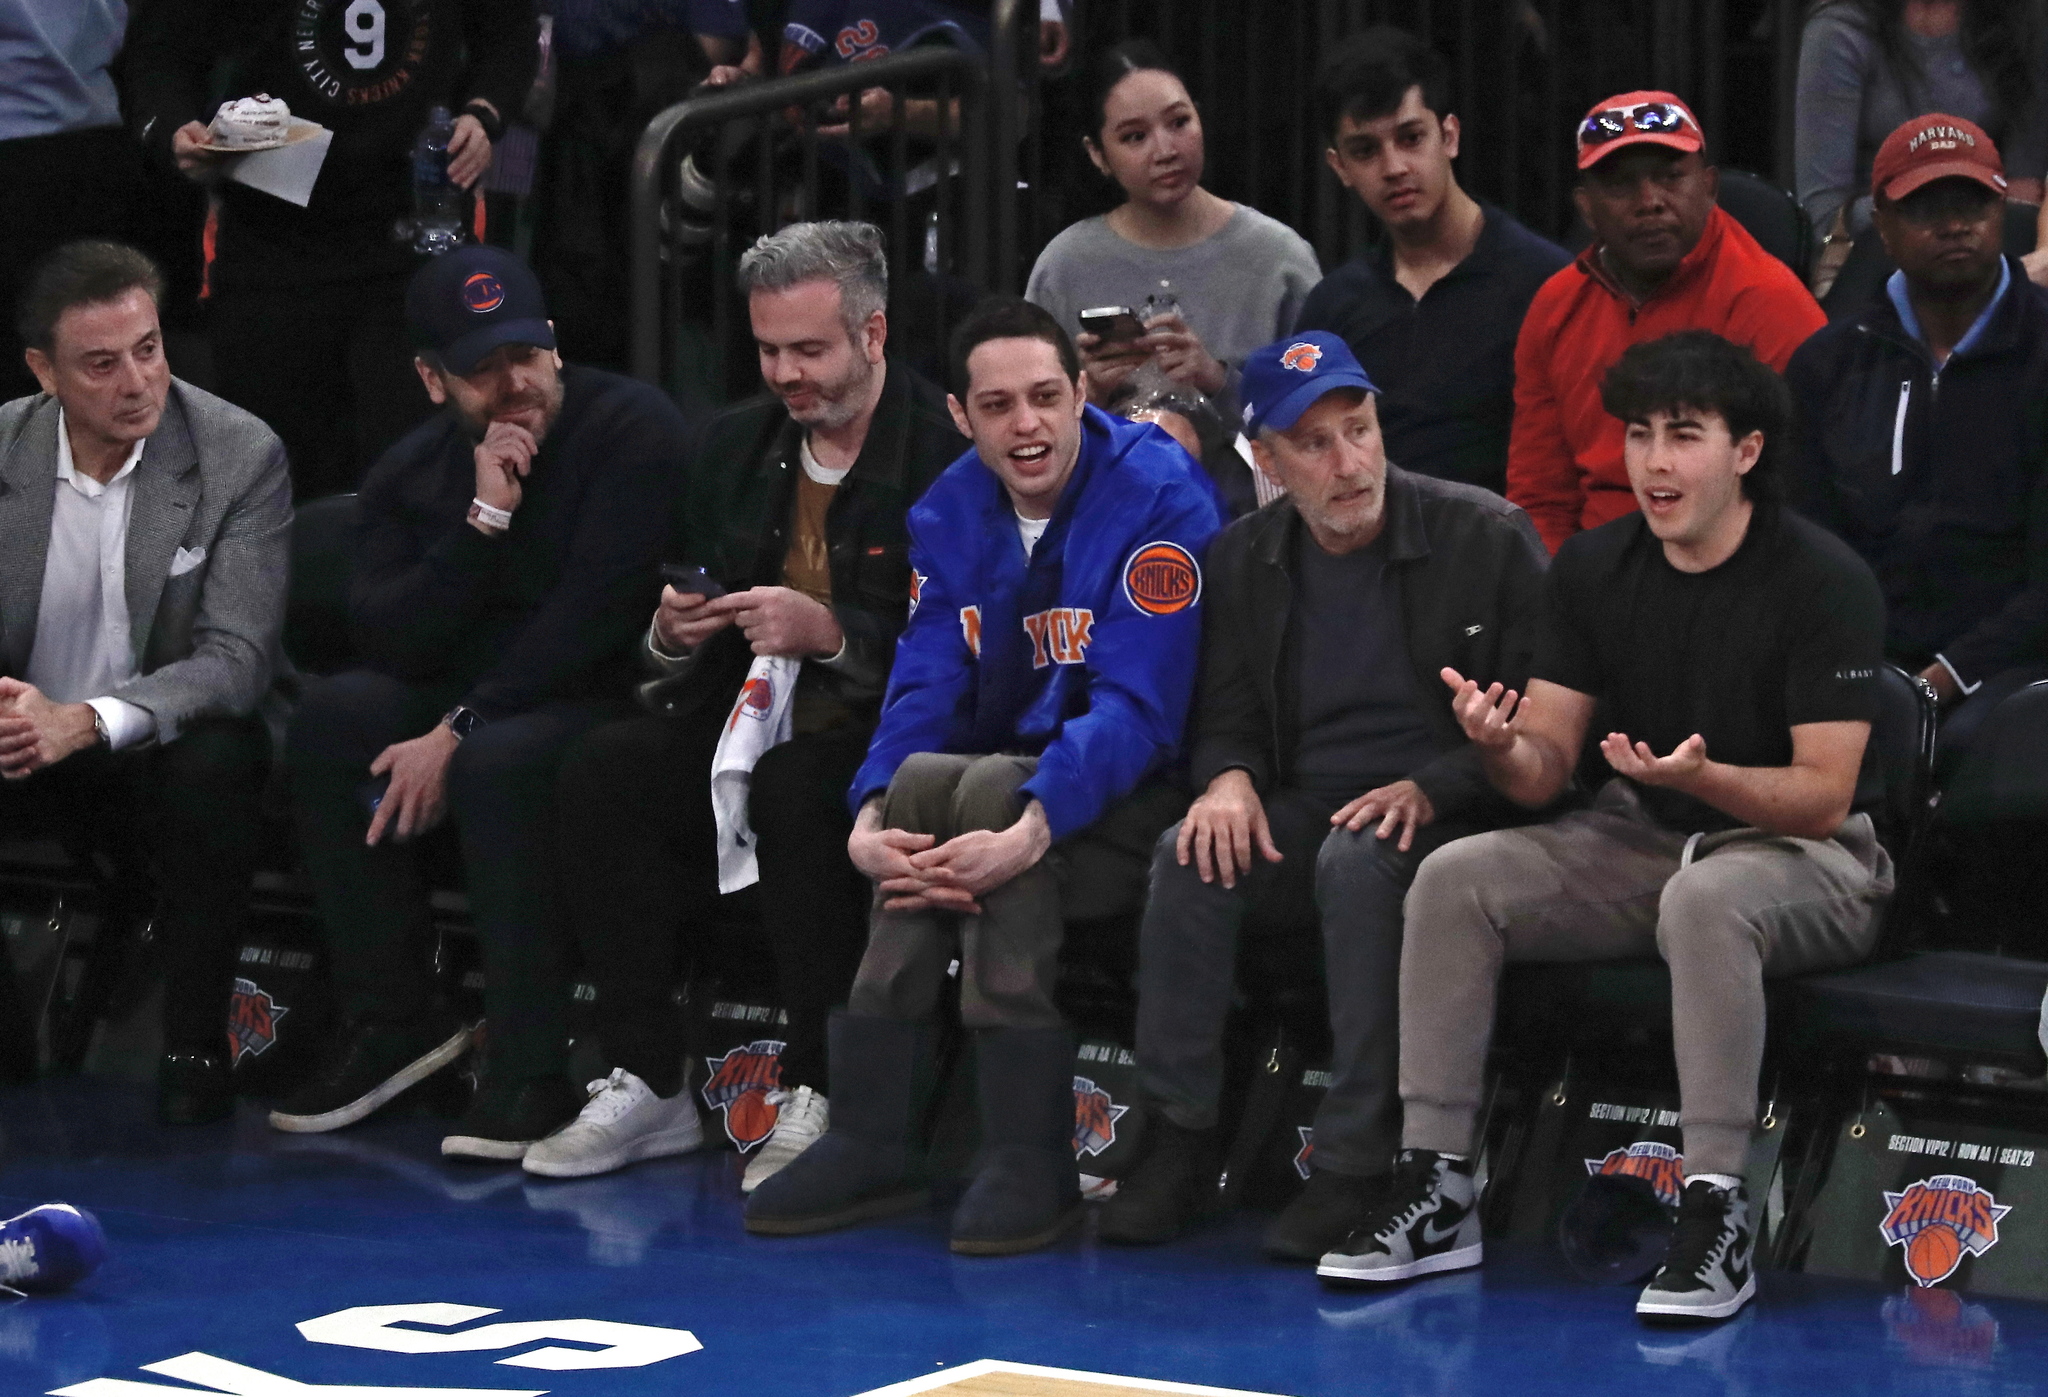 Pete Davidson attends an NBA game with friends